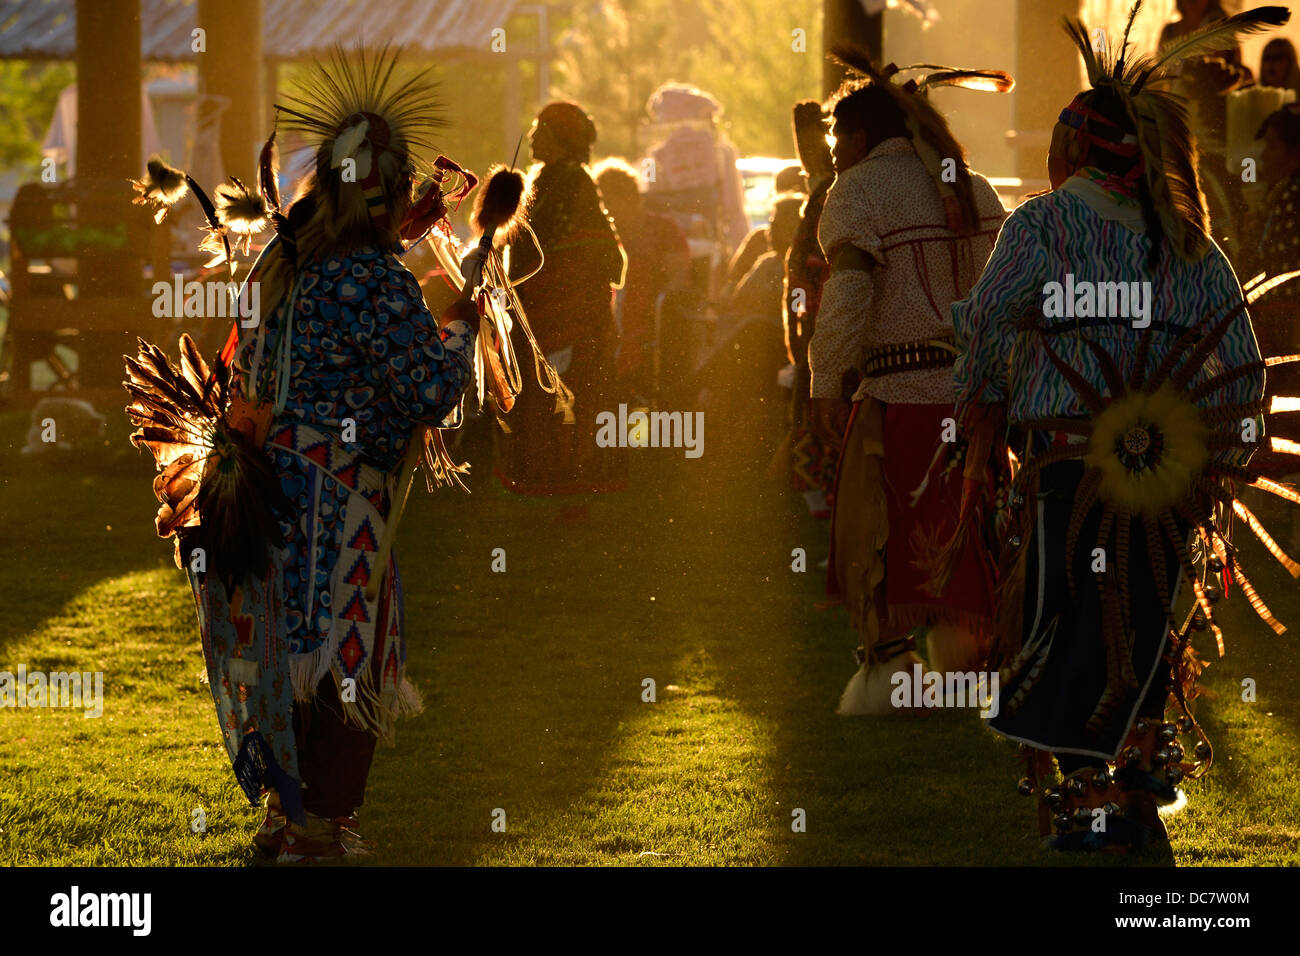 Dancers at the Tamkaliks Pow Wow in the Wallowa Valley of Oregon. Stock Photo